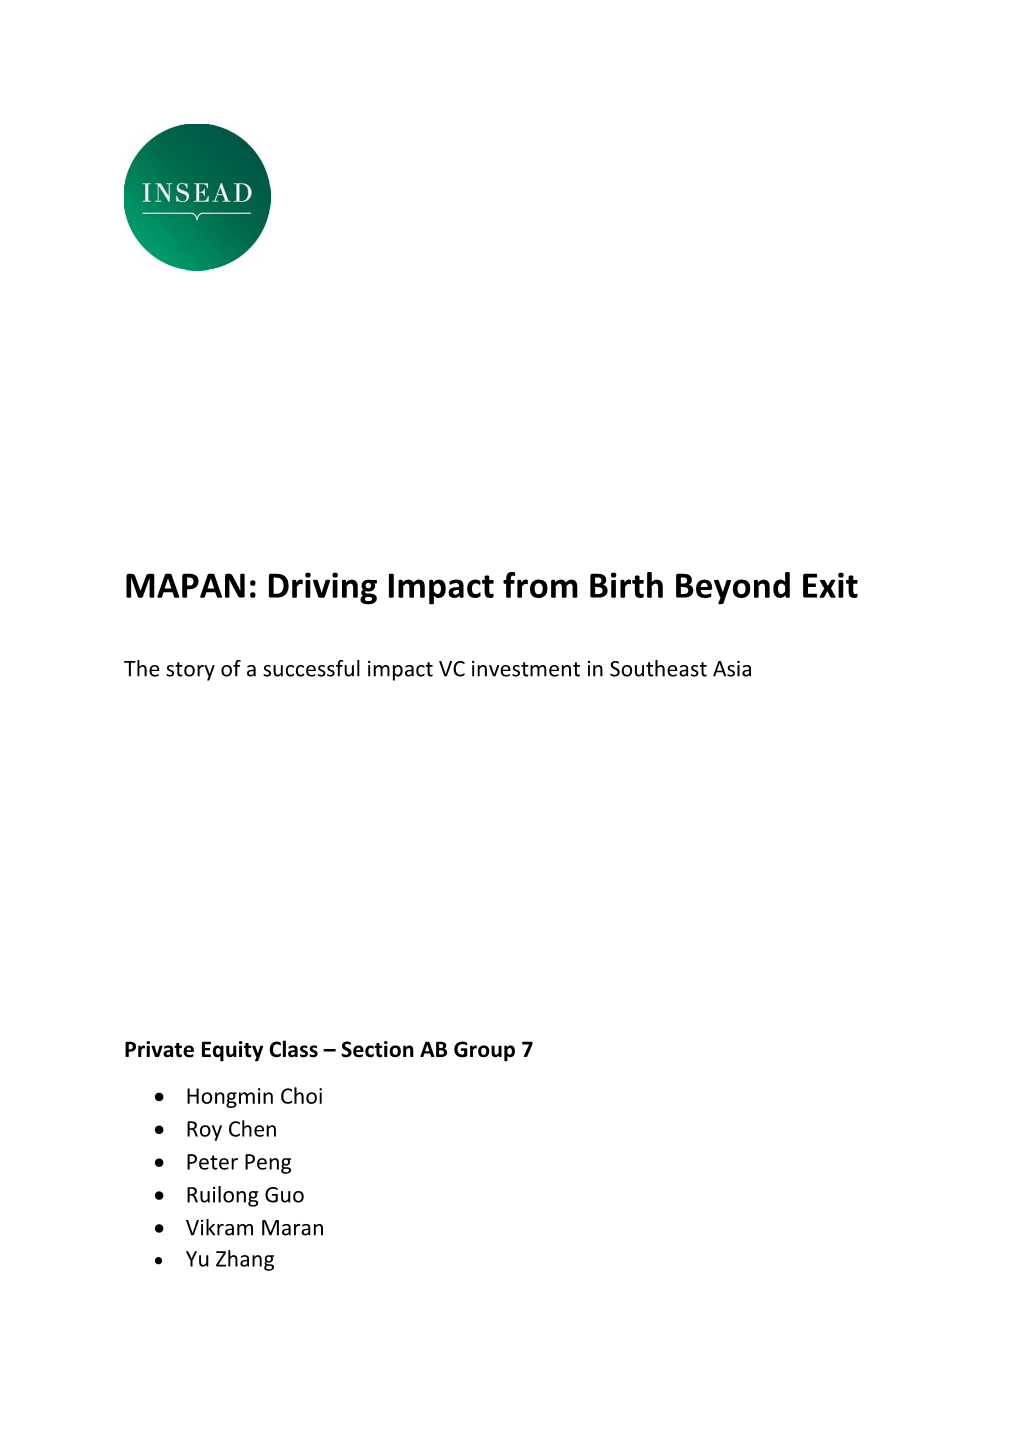 MAPAN: Driving Impact from Birth Beyond Exit